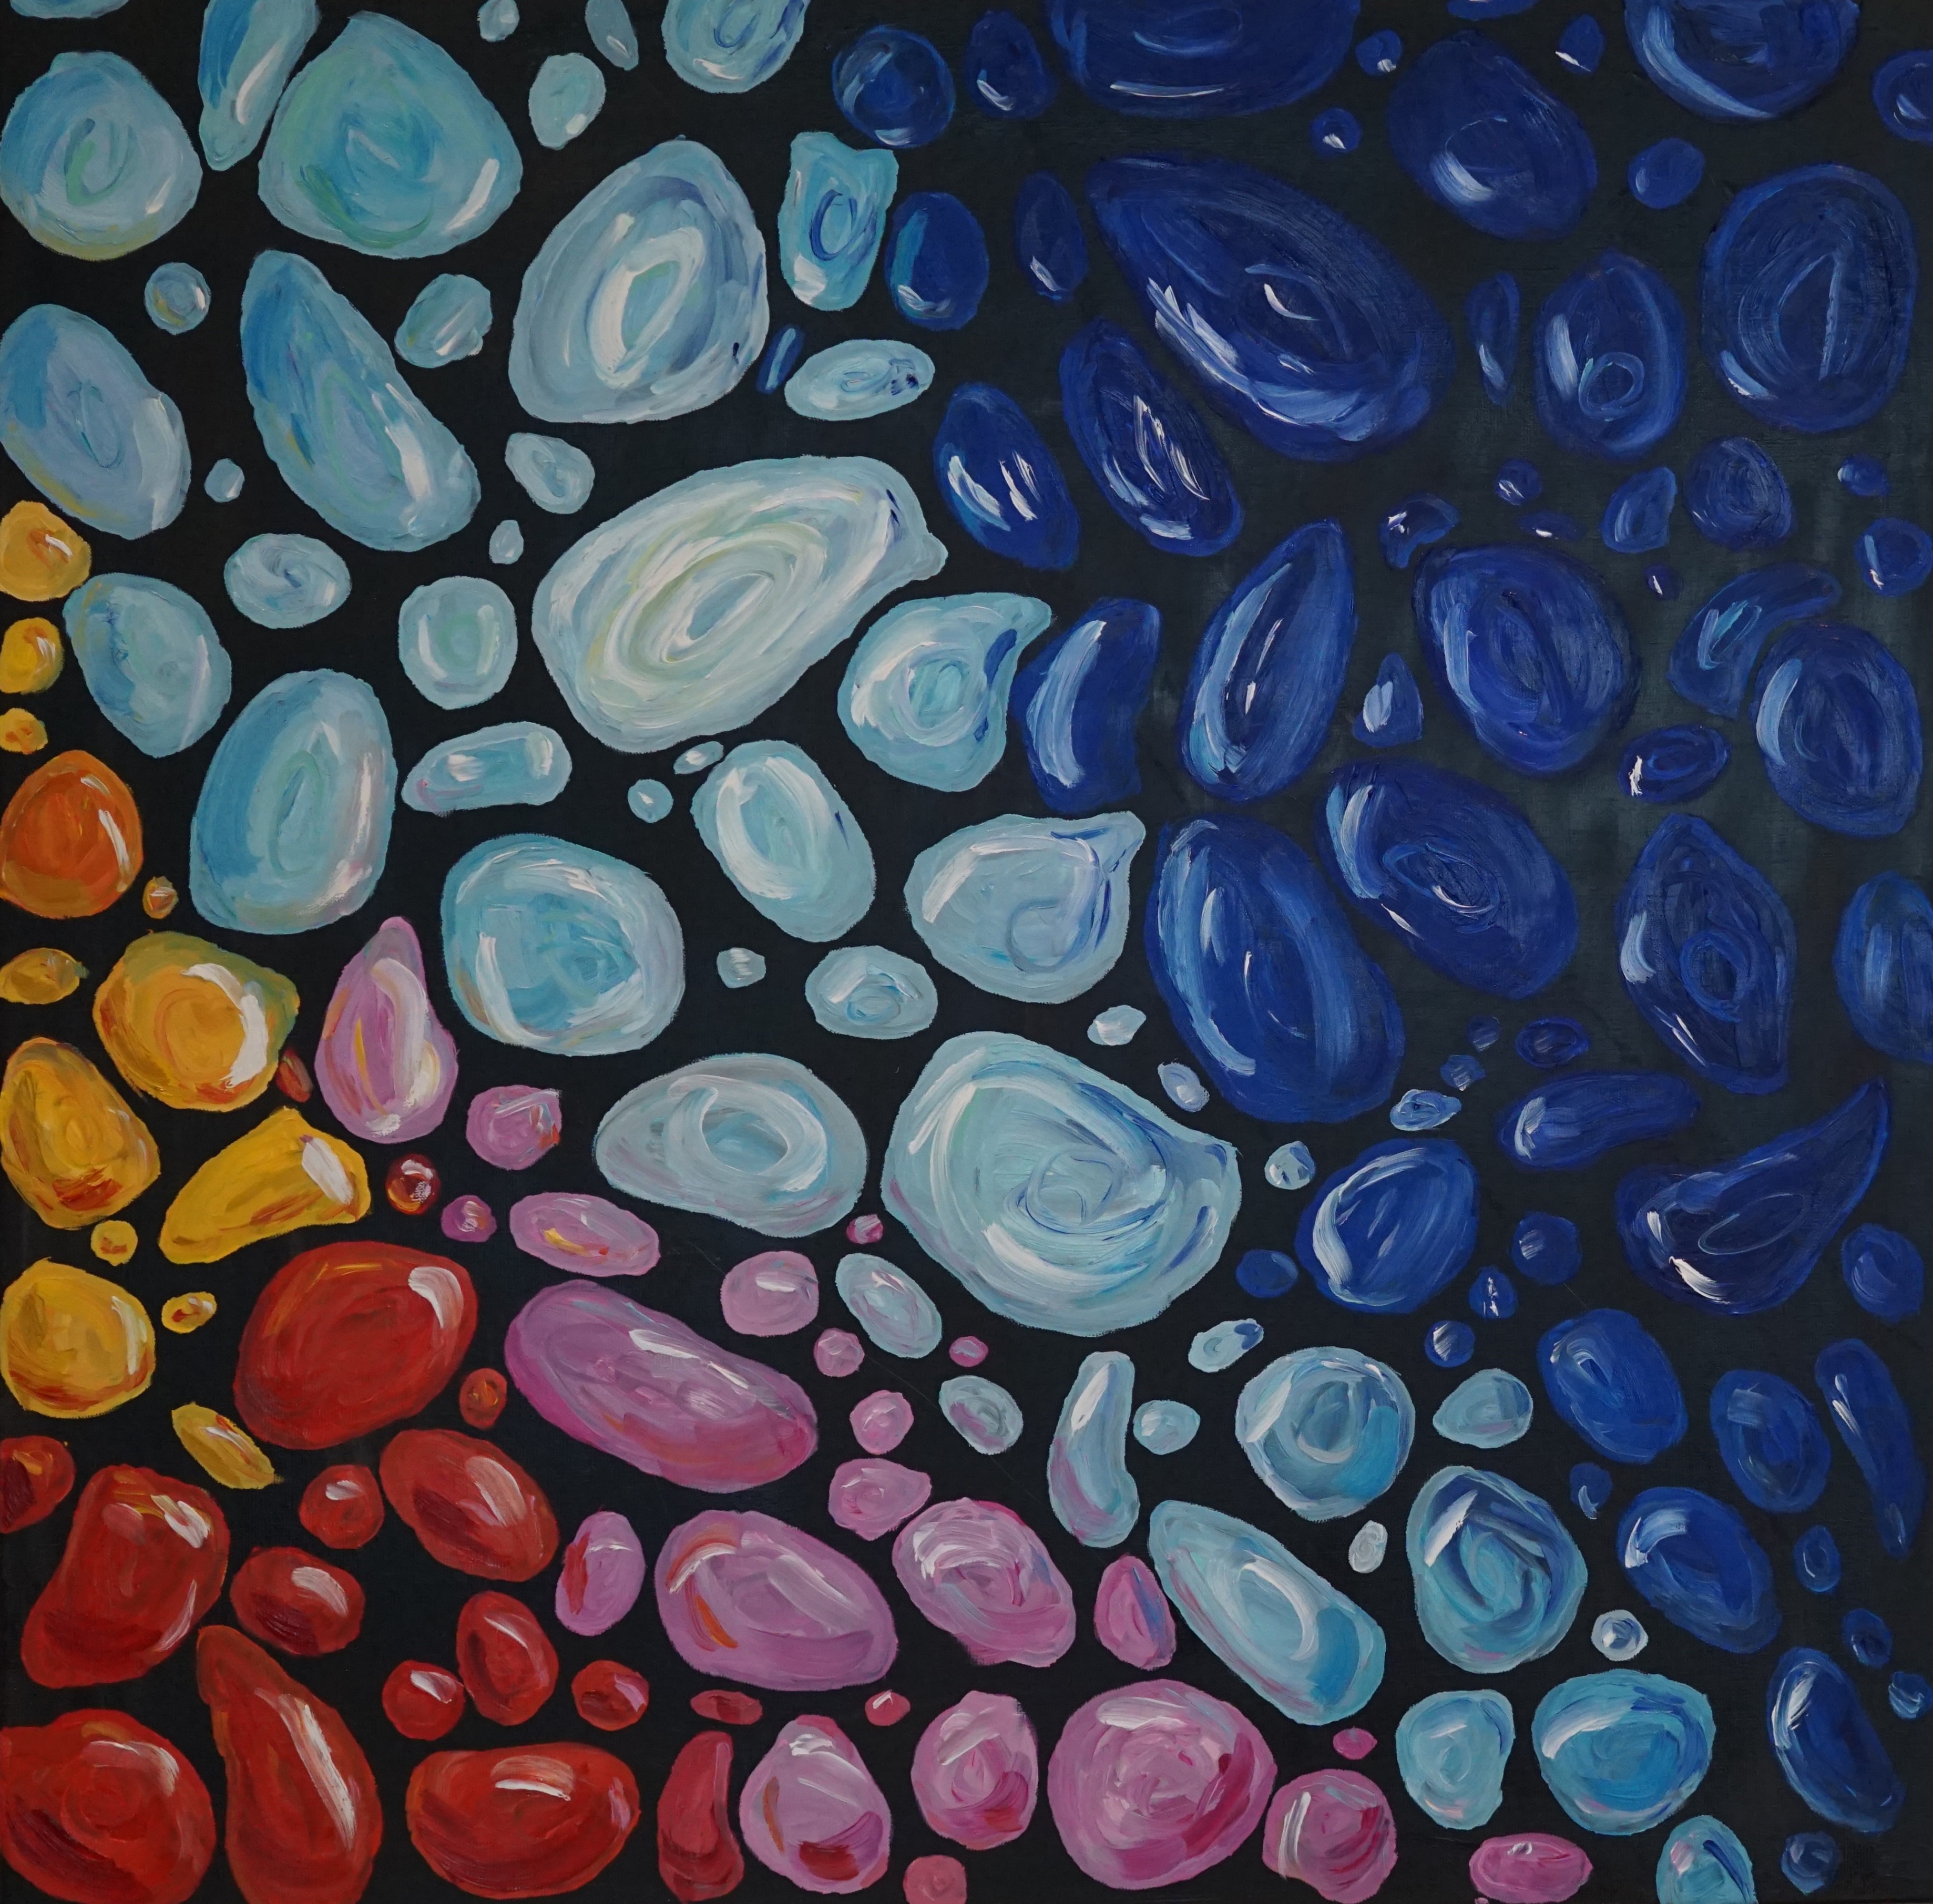 "Under the sea"
Diptych
Oil on canvas
90*90
